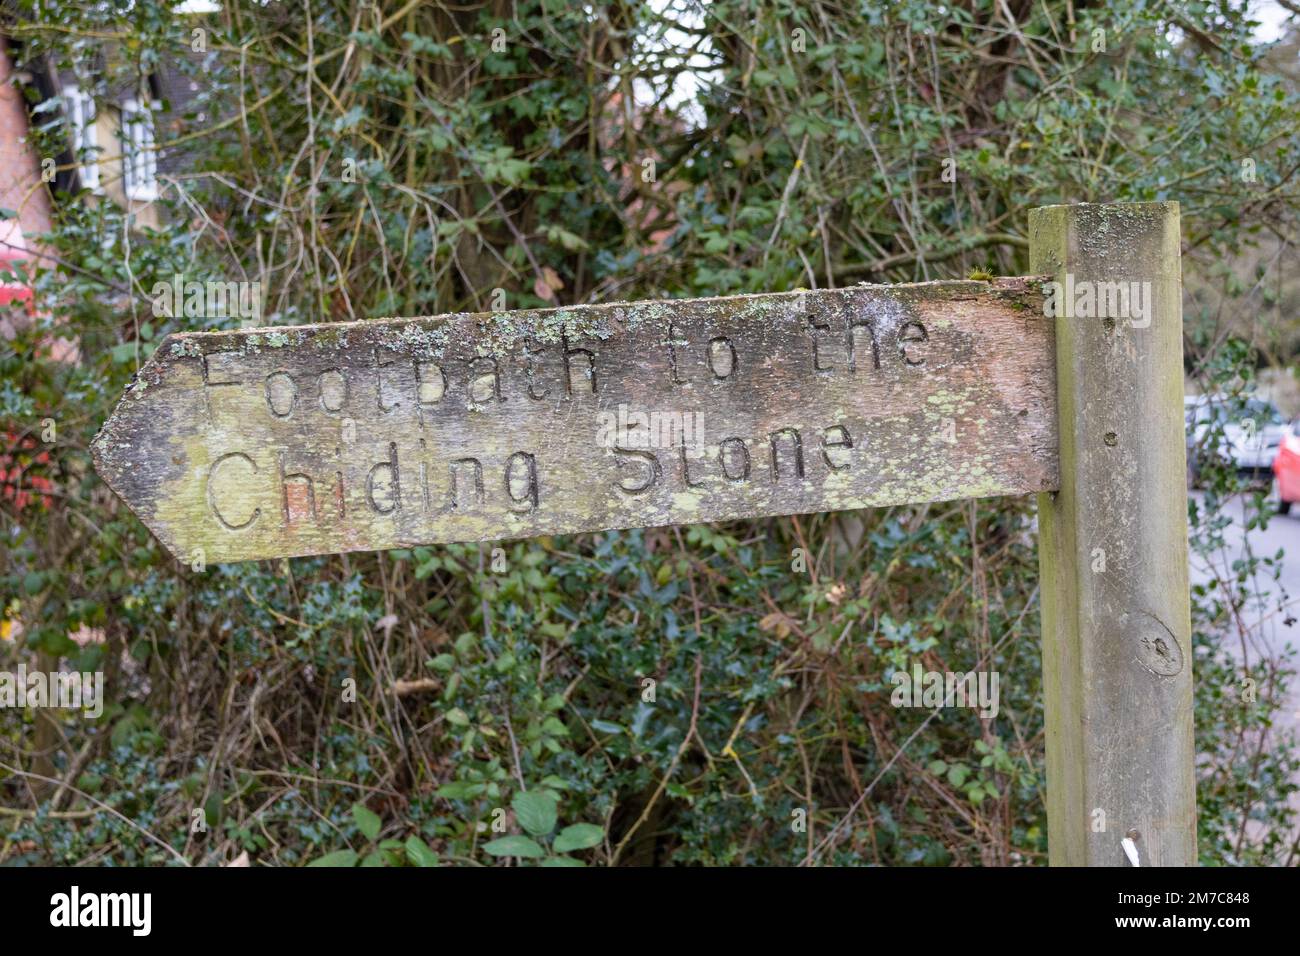 Sign for the footpath to the Chiding Stone, Chiddingstone village, kent, uk Stock Photo